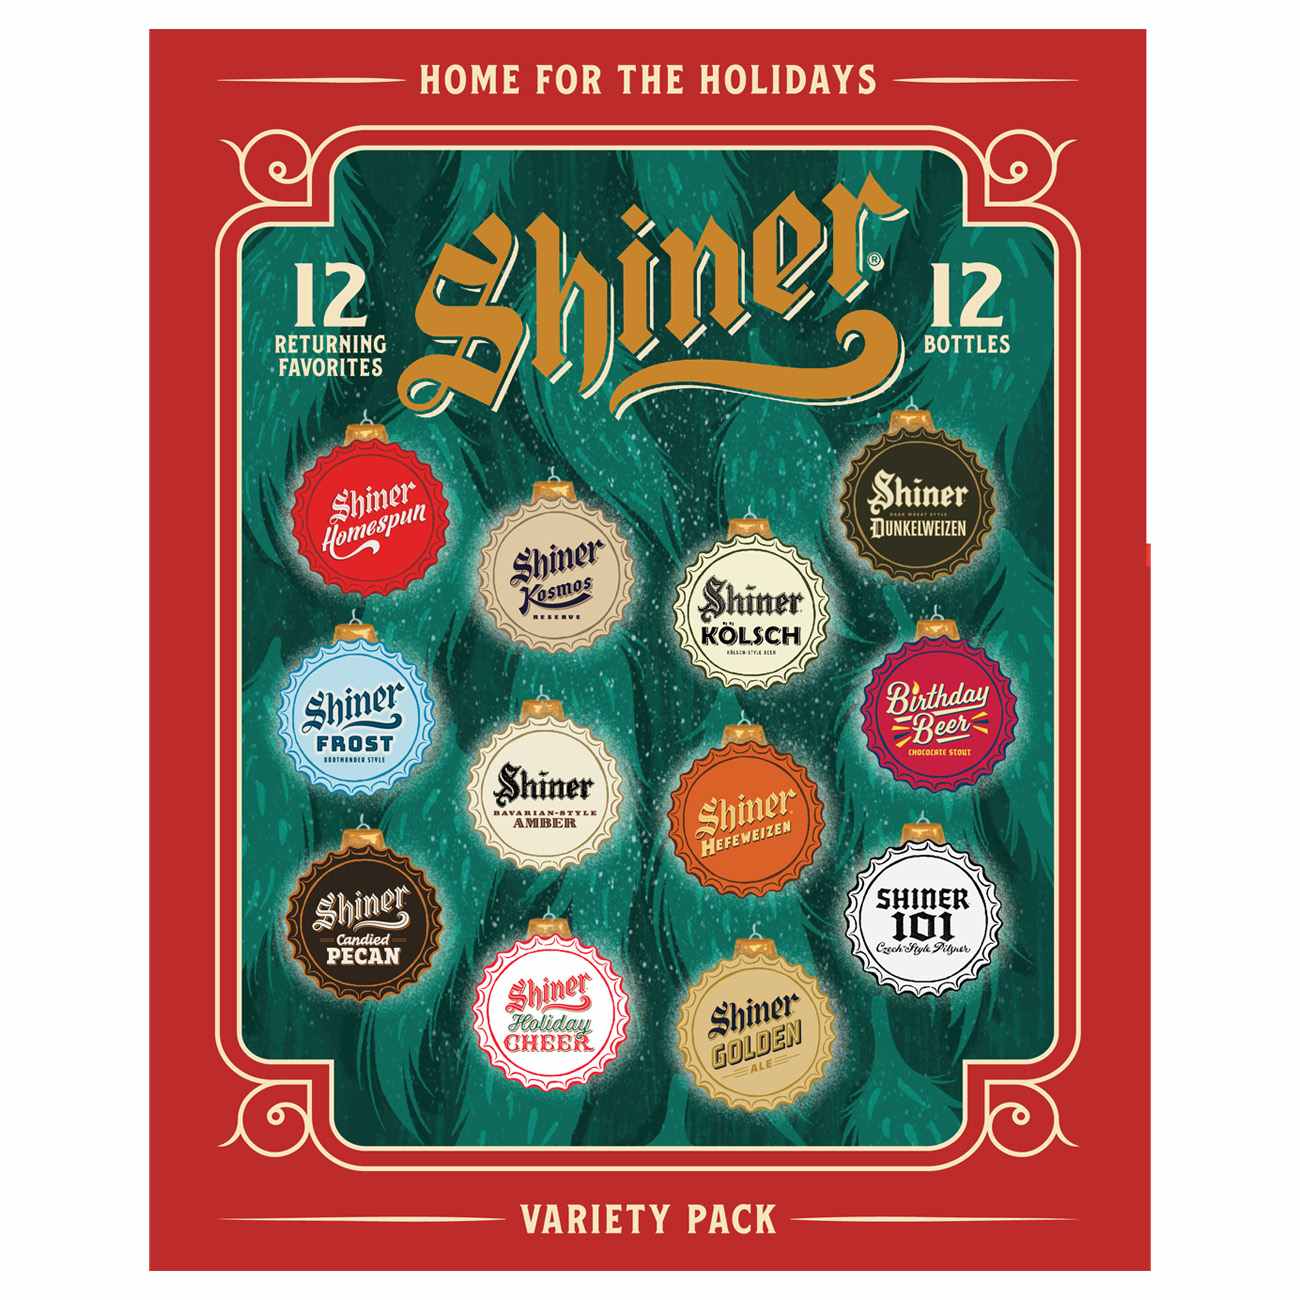 Shiner Home for The Holidays Variety Pack Beer 12 pk Bottles; image 2 of 2